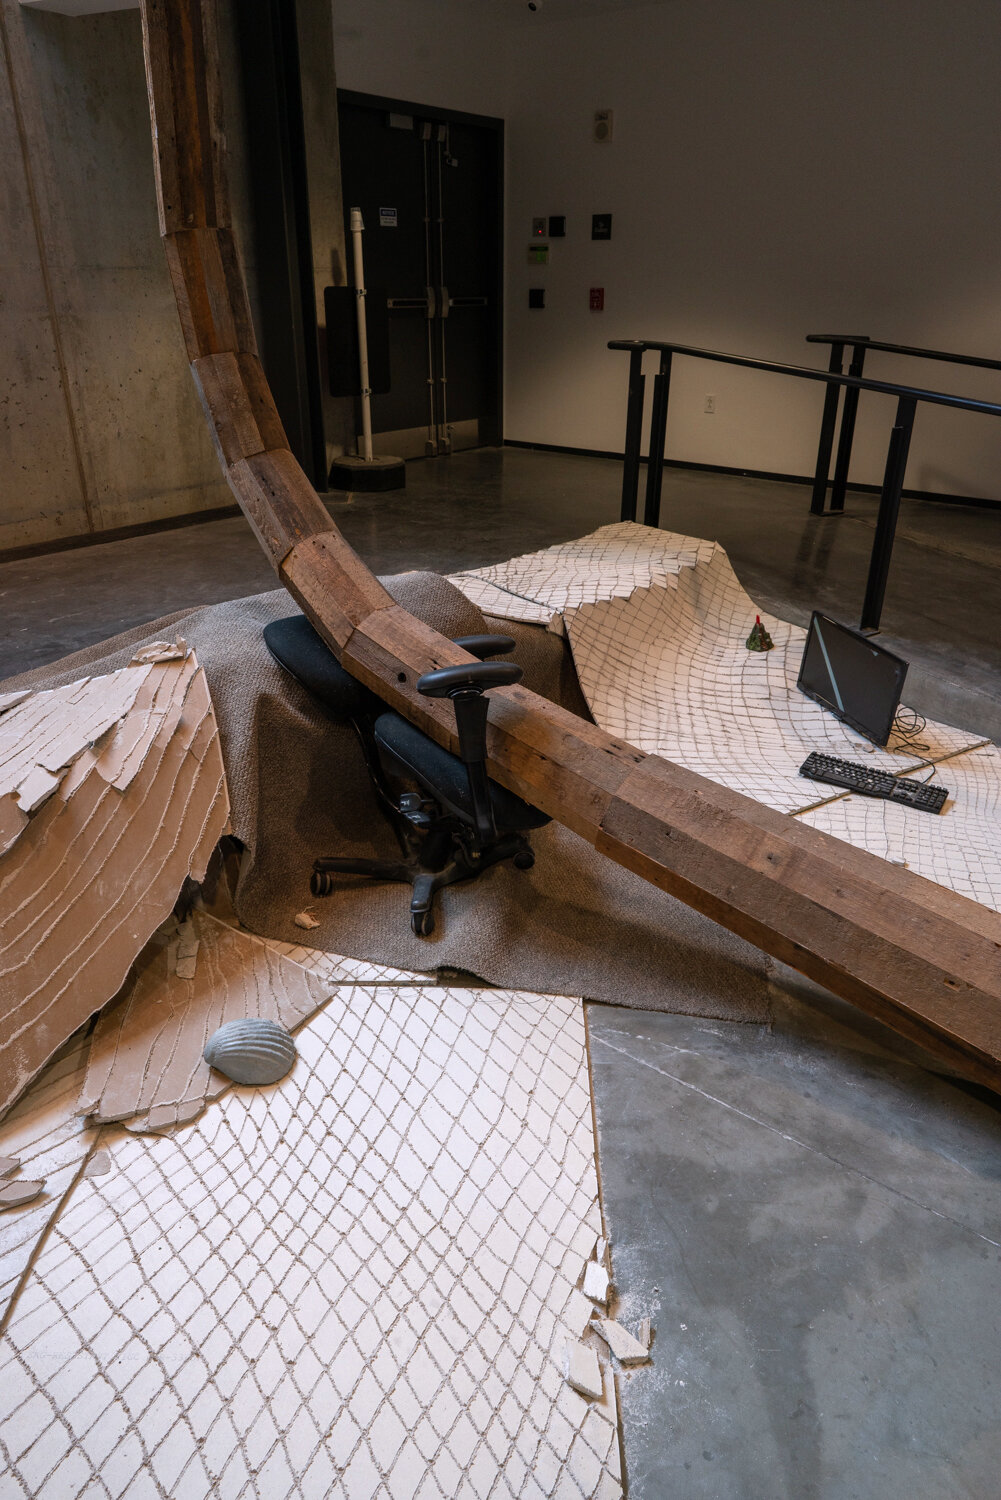  Alex Zak  Swamped , 2019  Sheet rock, plaster wrap, carpet, wood, steel, aluminum, paint, cement, sand, oven-bake clay,   office chair, modified ceiling fan, Monitor, Keyboard, aquarium volcano, red sharpie 192 x 204 x 196 inches (488 x 305 x 498 cm